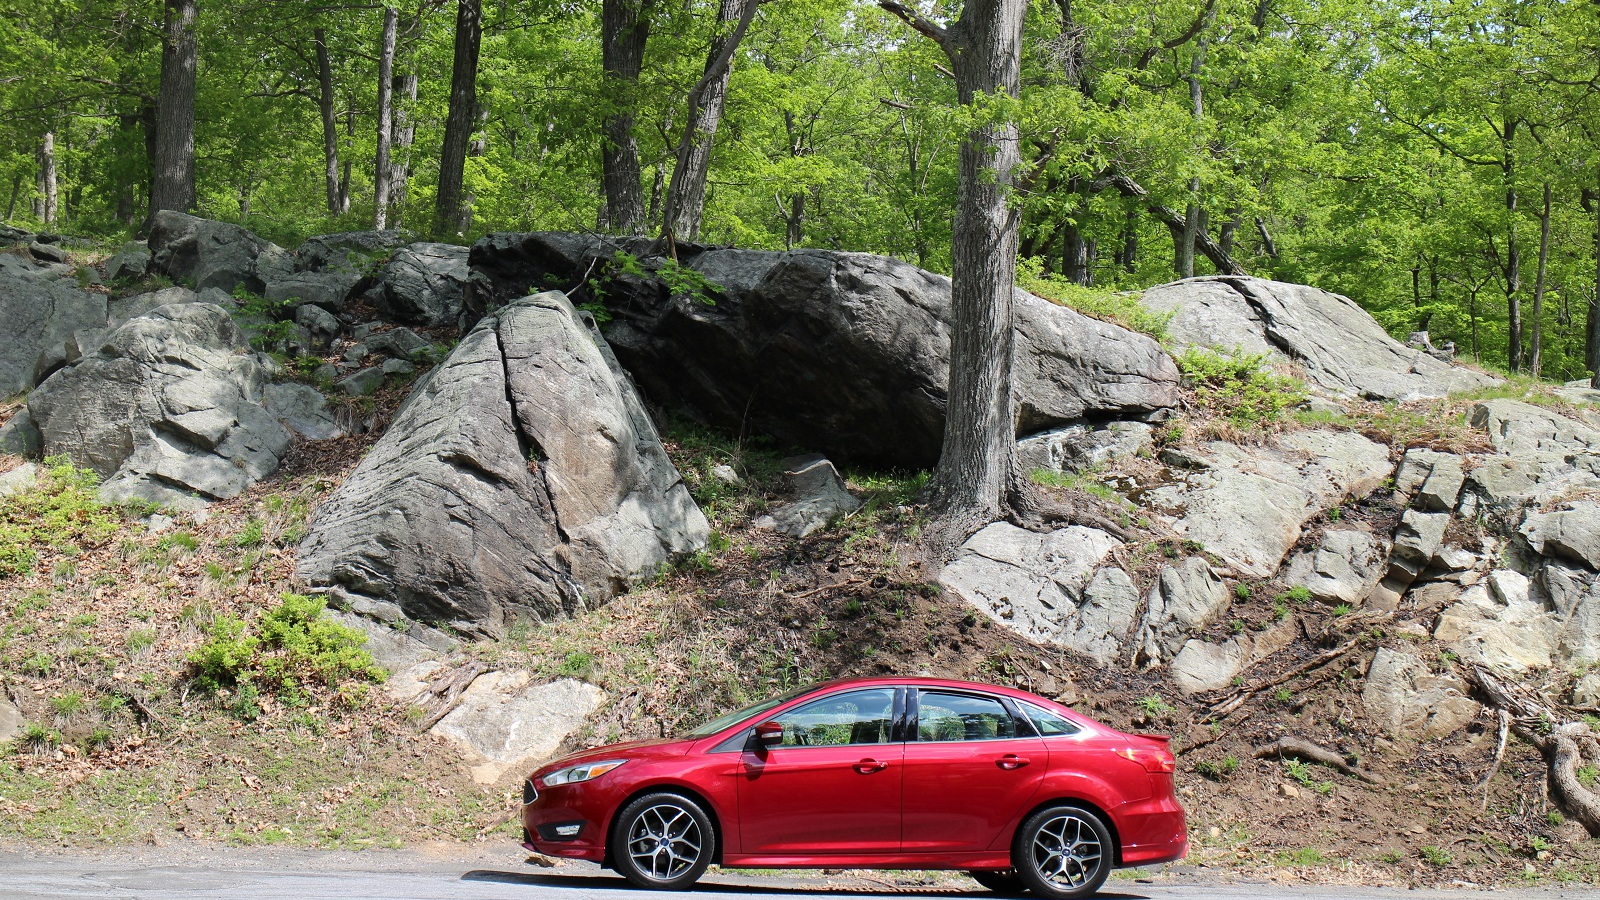 2015 Ford Focus SE EcoBoost, Bear Mountain State Park, NY, May 2015